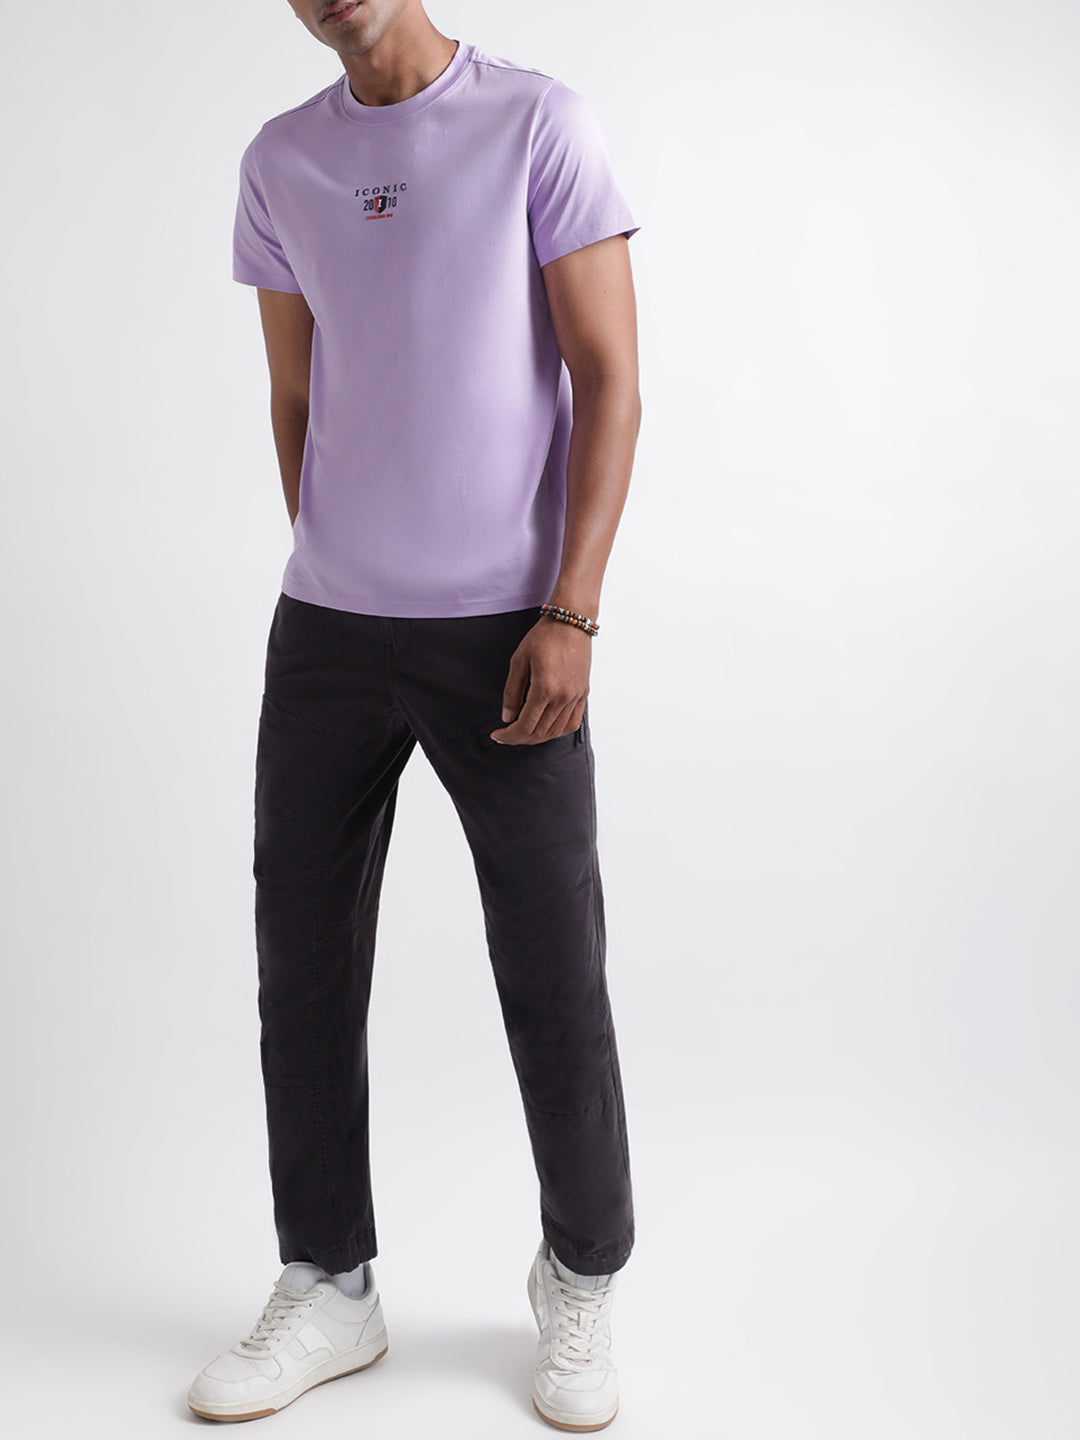 Iconic Lilac Regular Fit T-Shirt